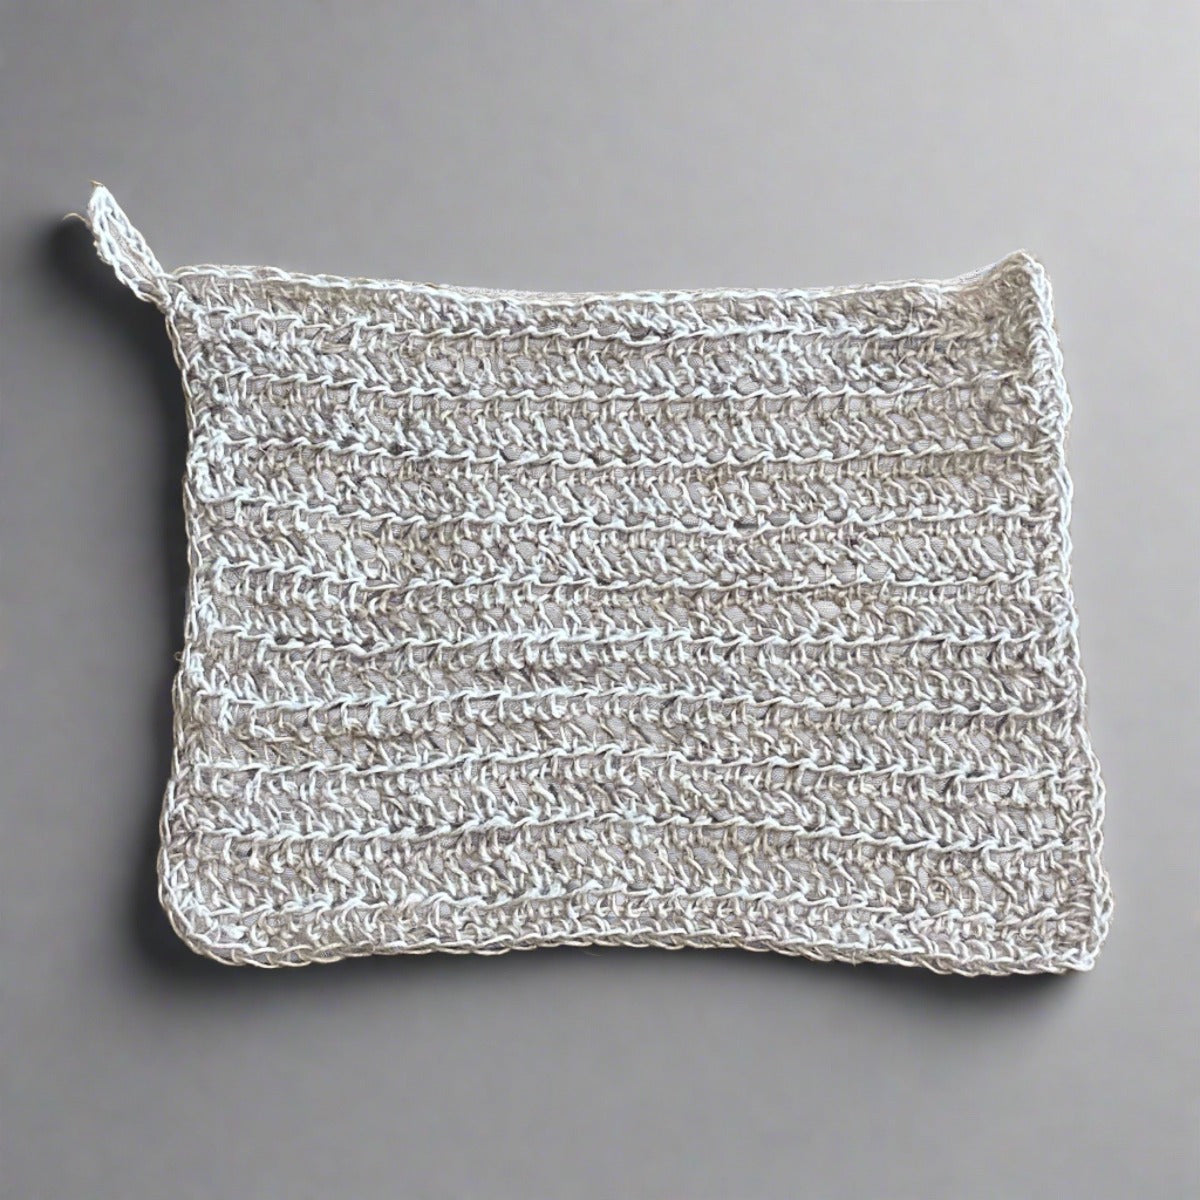 A soft and sustainable hemp washcloth, featuring natural fibers and gentle texture, perfect for eco-friendly cleansing routines and promoting sustainable living